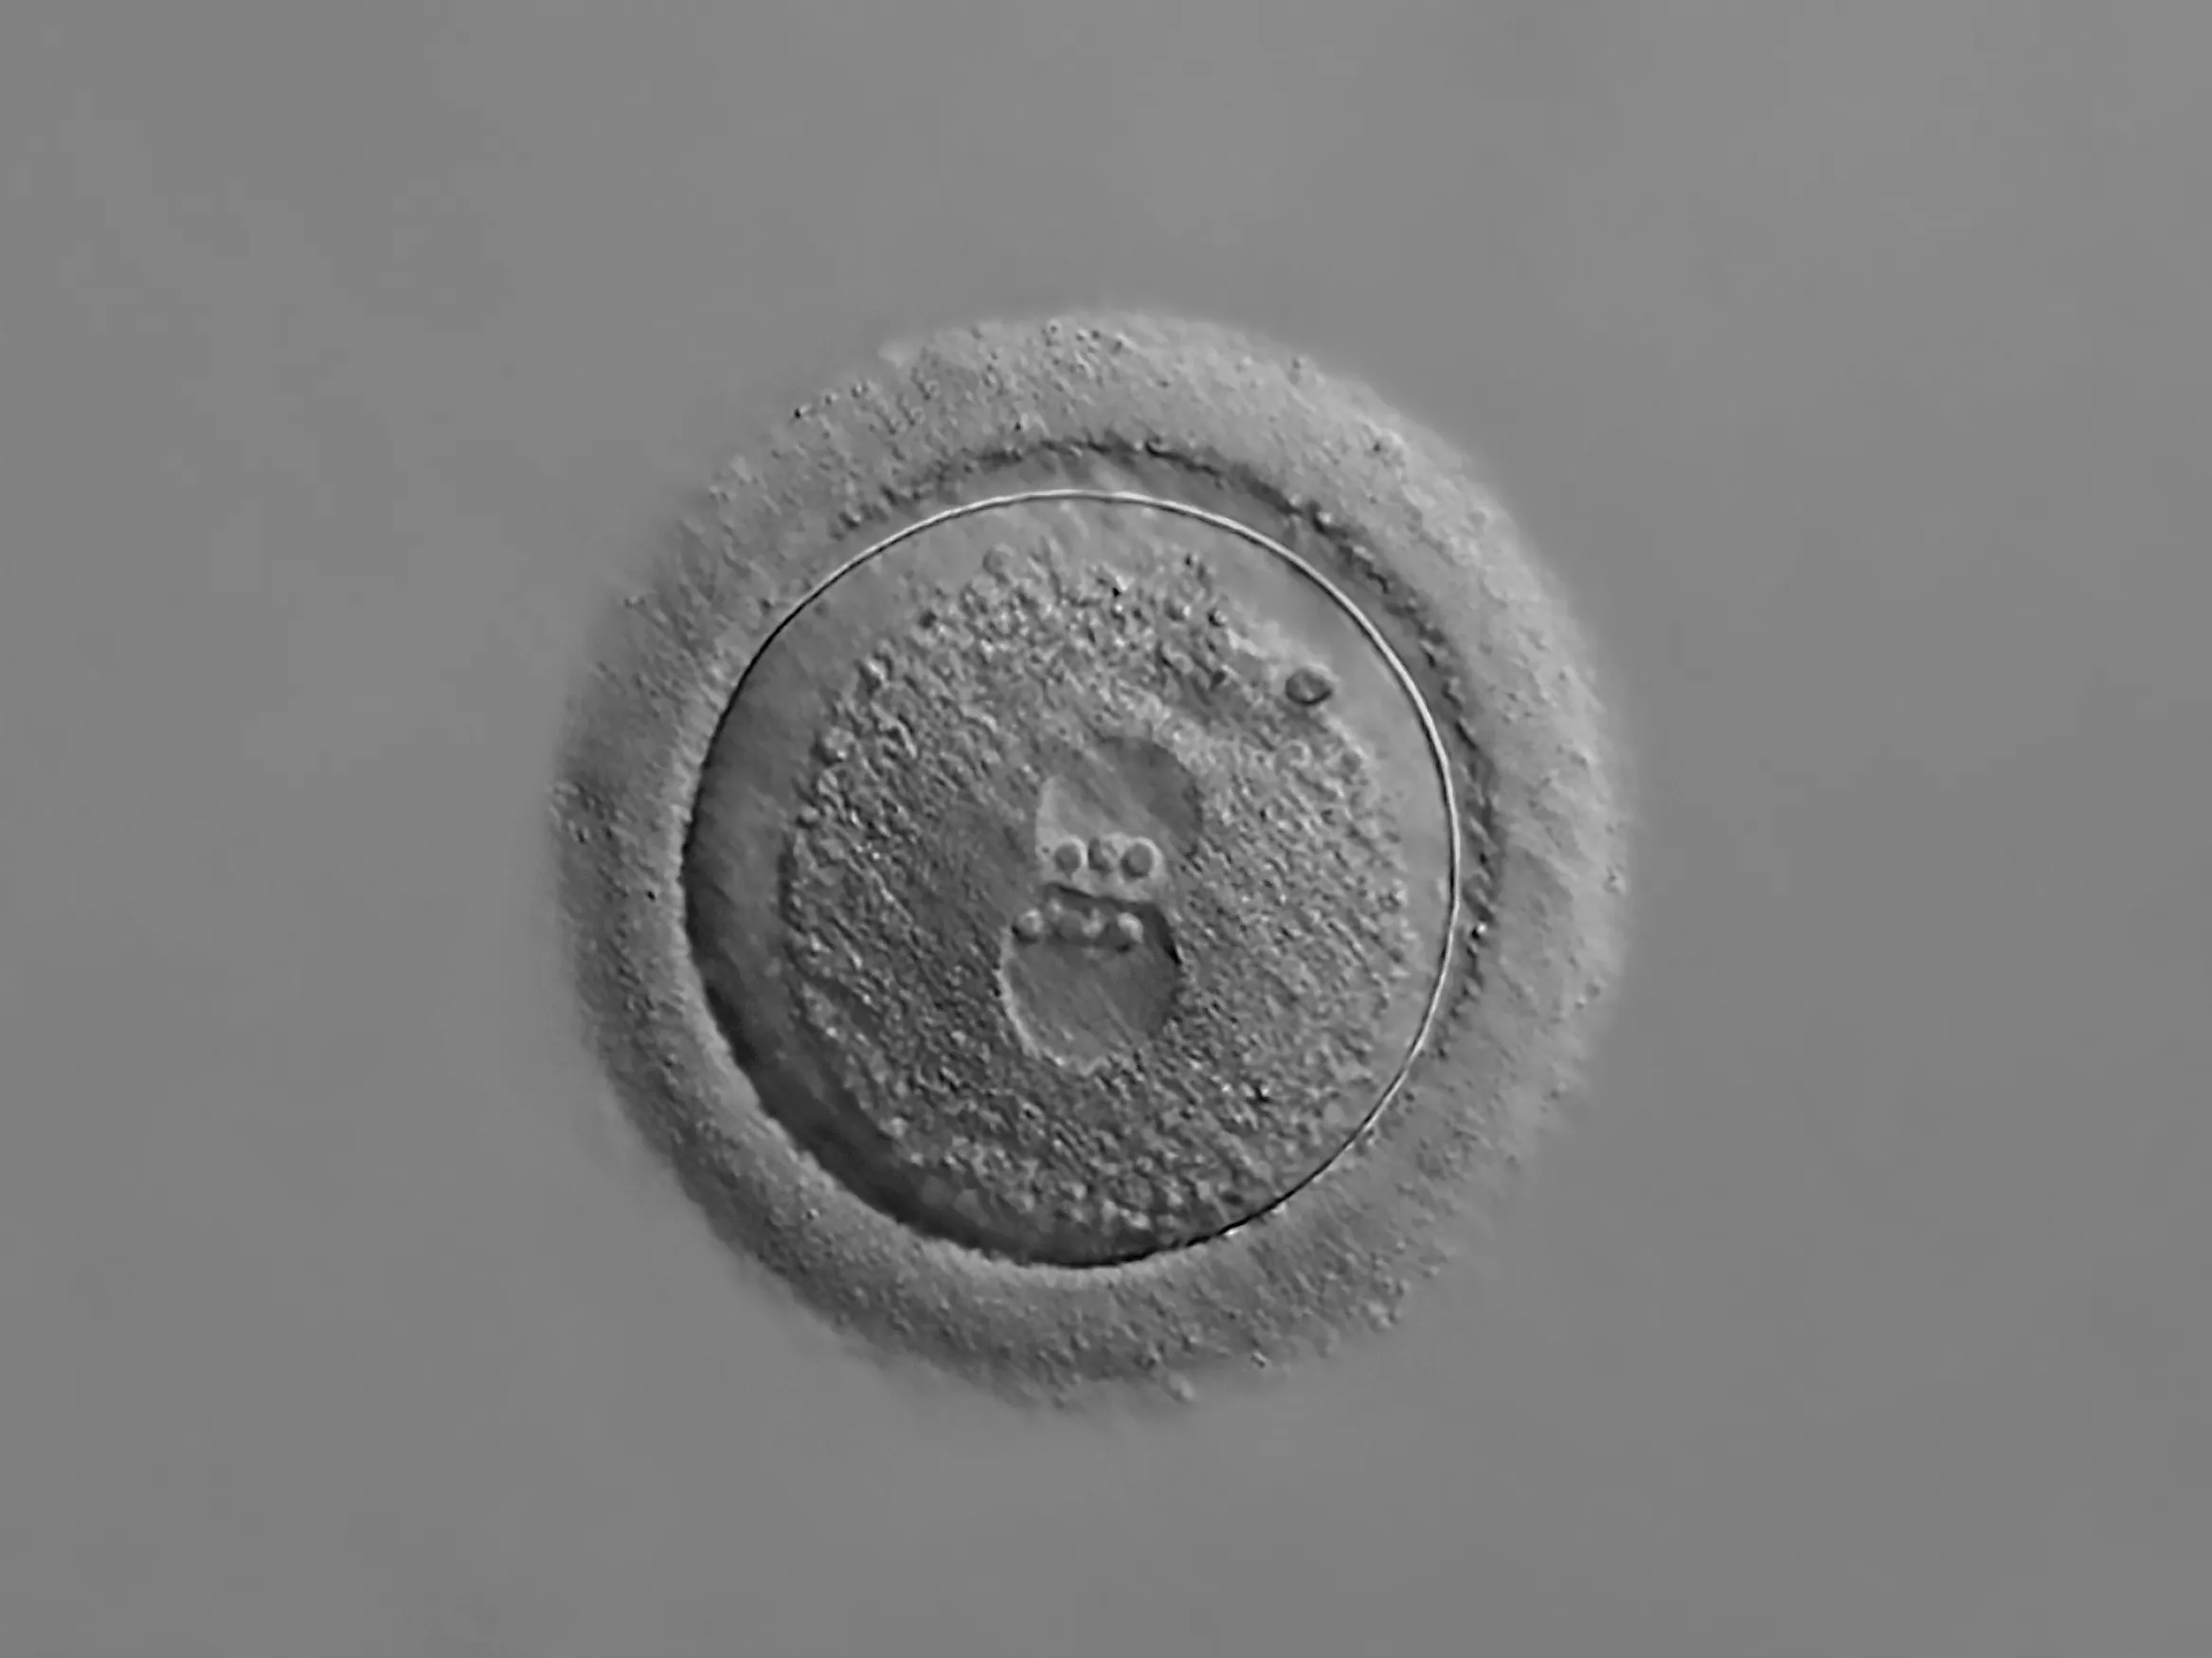 Photomicrograph of a human zygote with two pronuclei, 20x magnification.?w=200&h=150